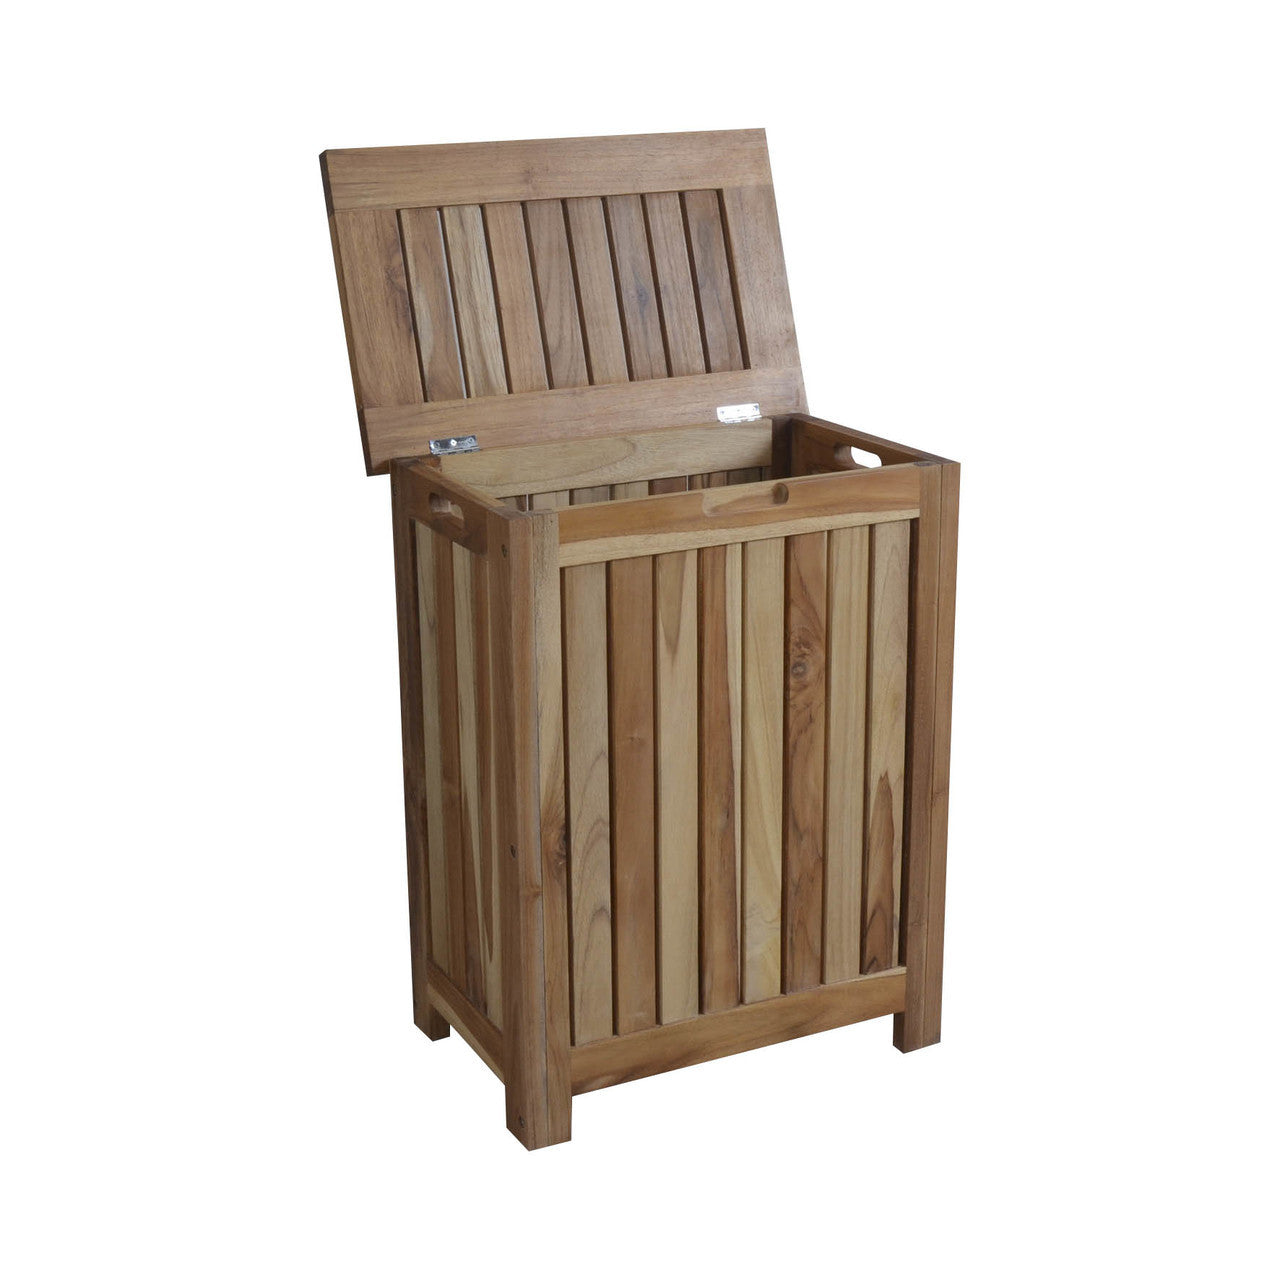 EcoDecors® Eleganto® 25" Teak Wood Double Laundry Storage Hamper with Removable Bags in EarthyTeak Finish